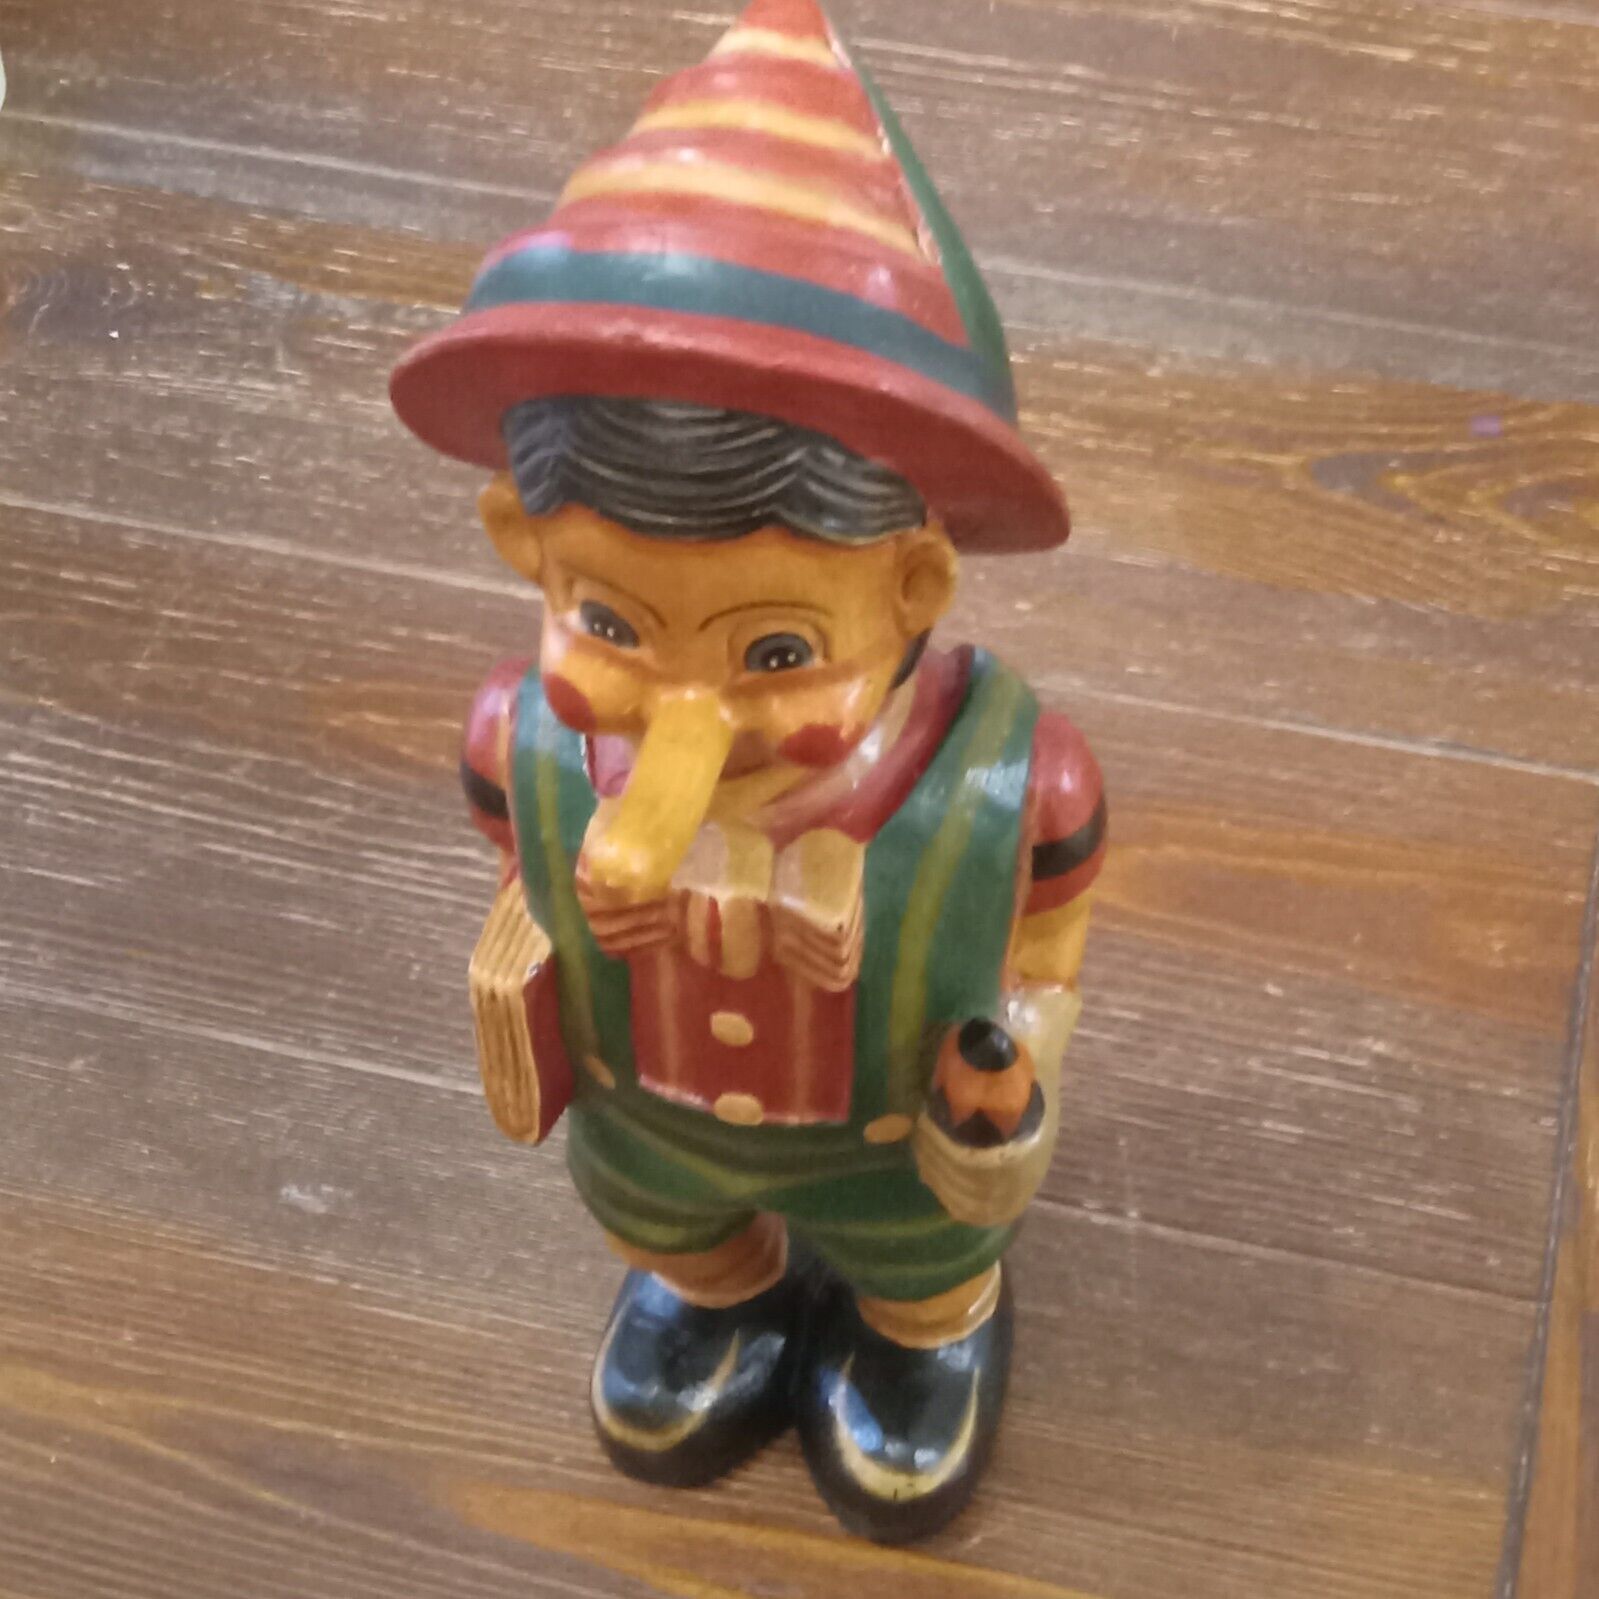 Hand painted wooden carved antique vintage rare one of a kind 1/1 Pinocchio toy